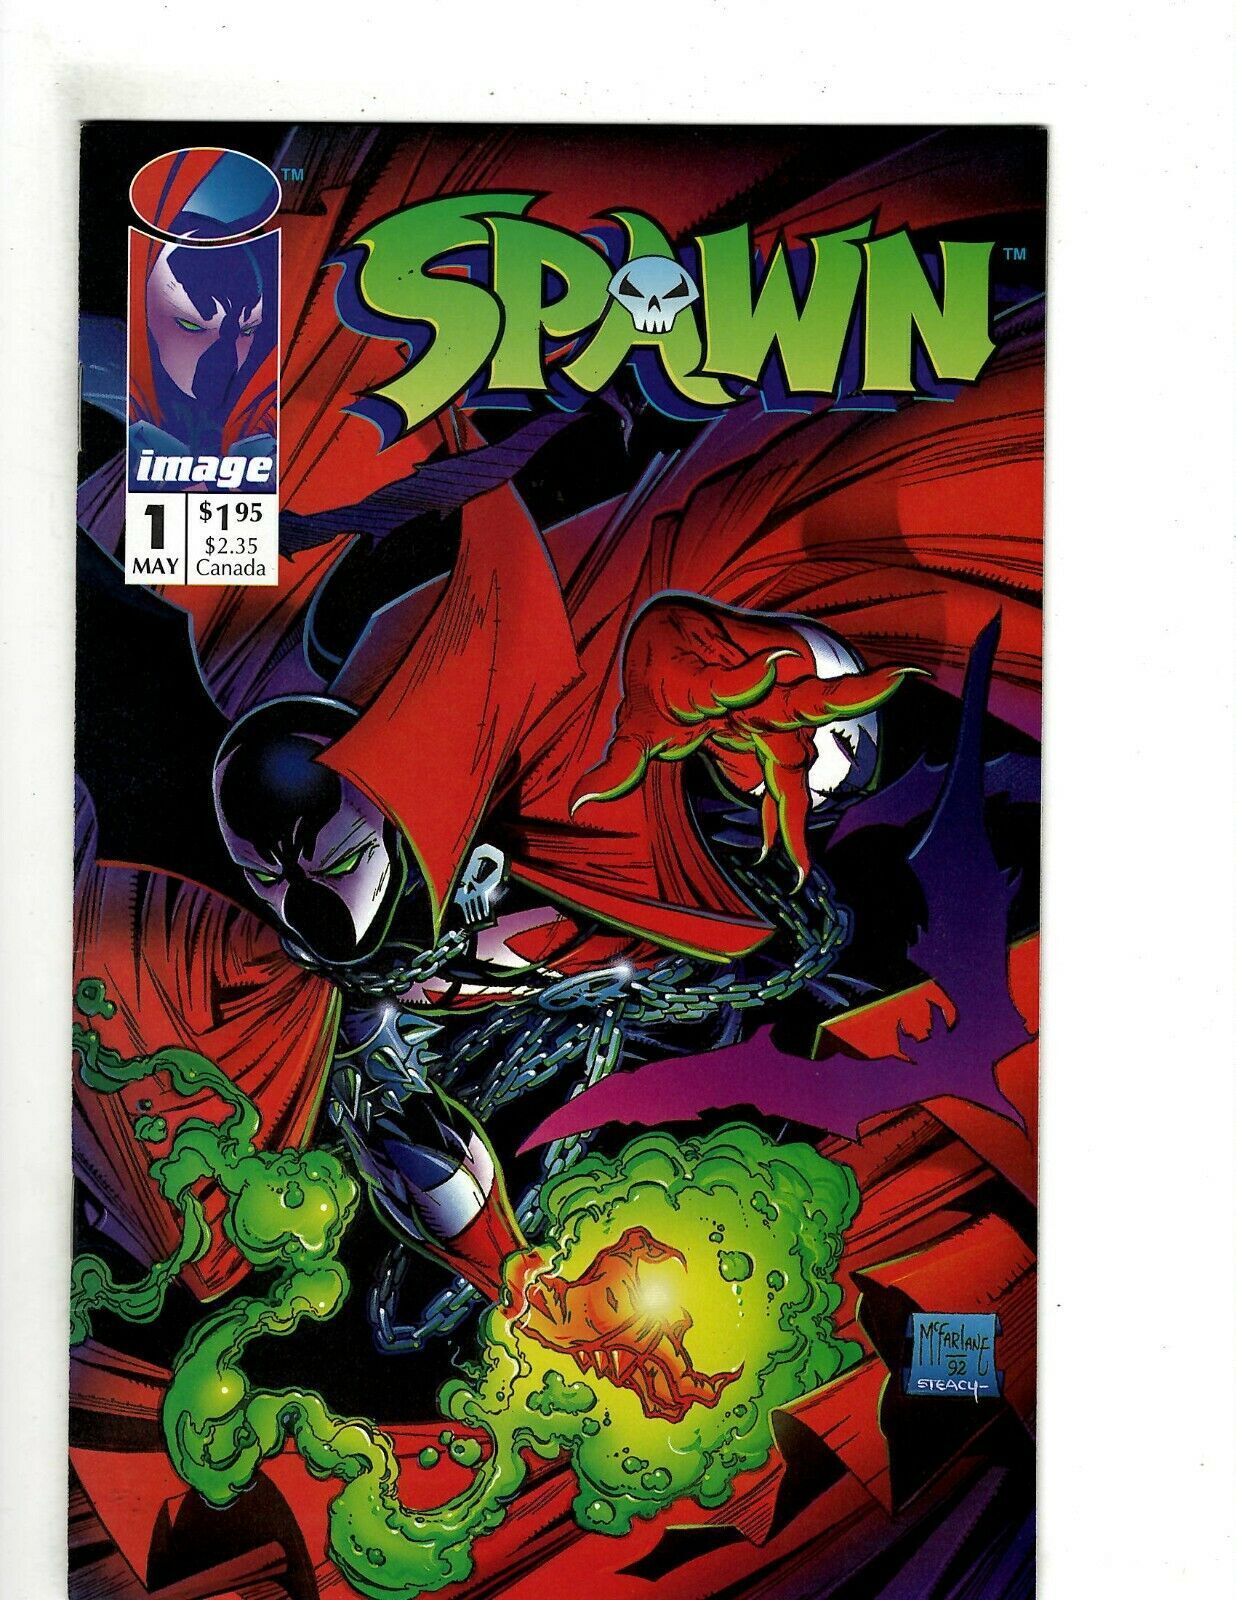 Spawn #78-1st print 150 copies available! VF/NM